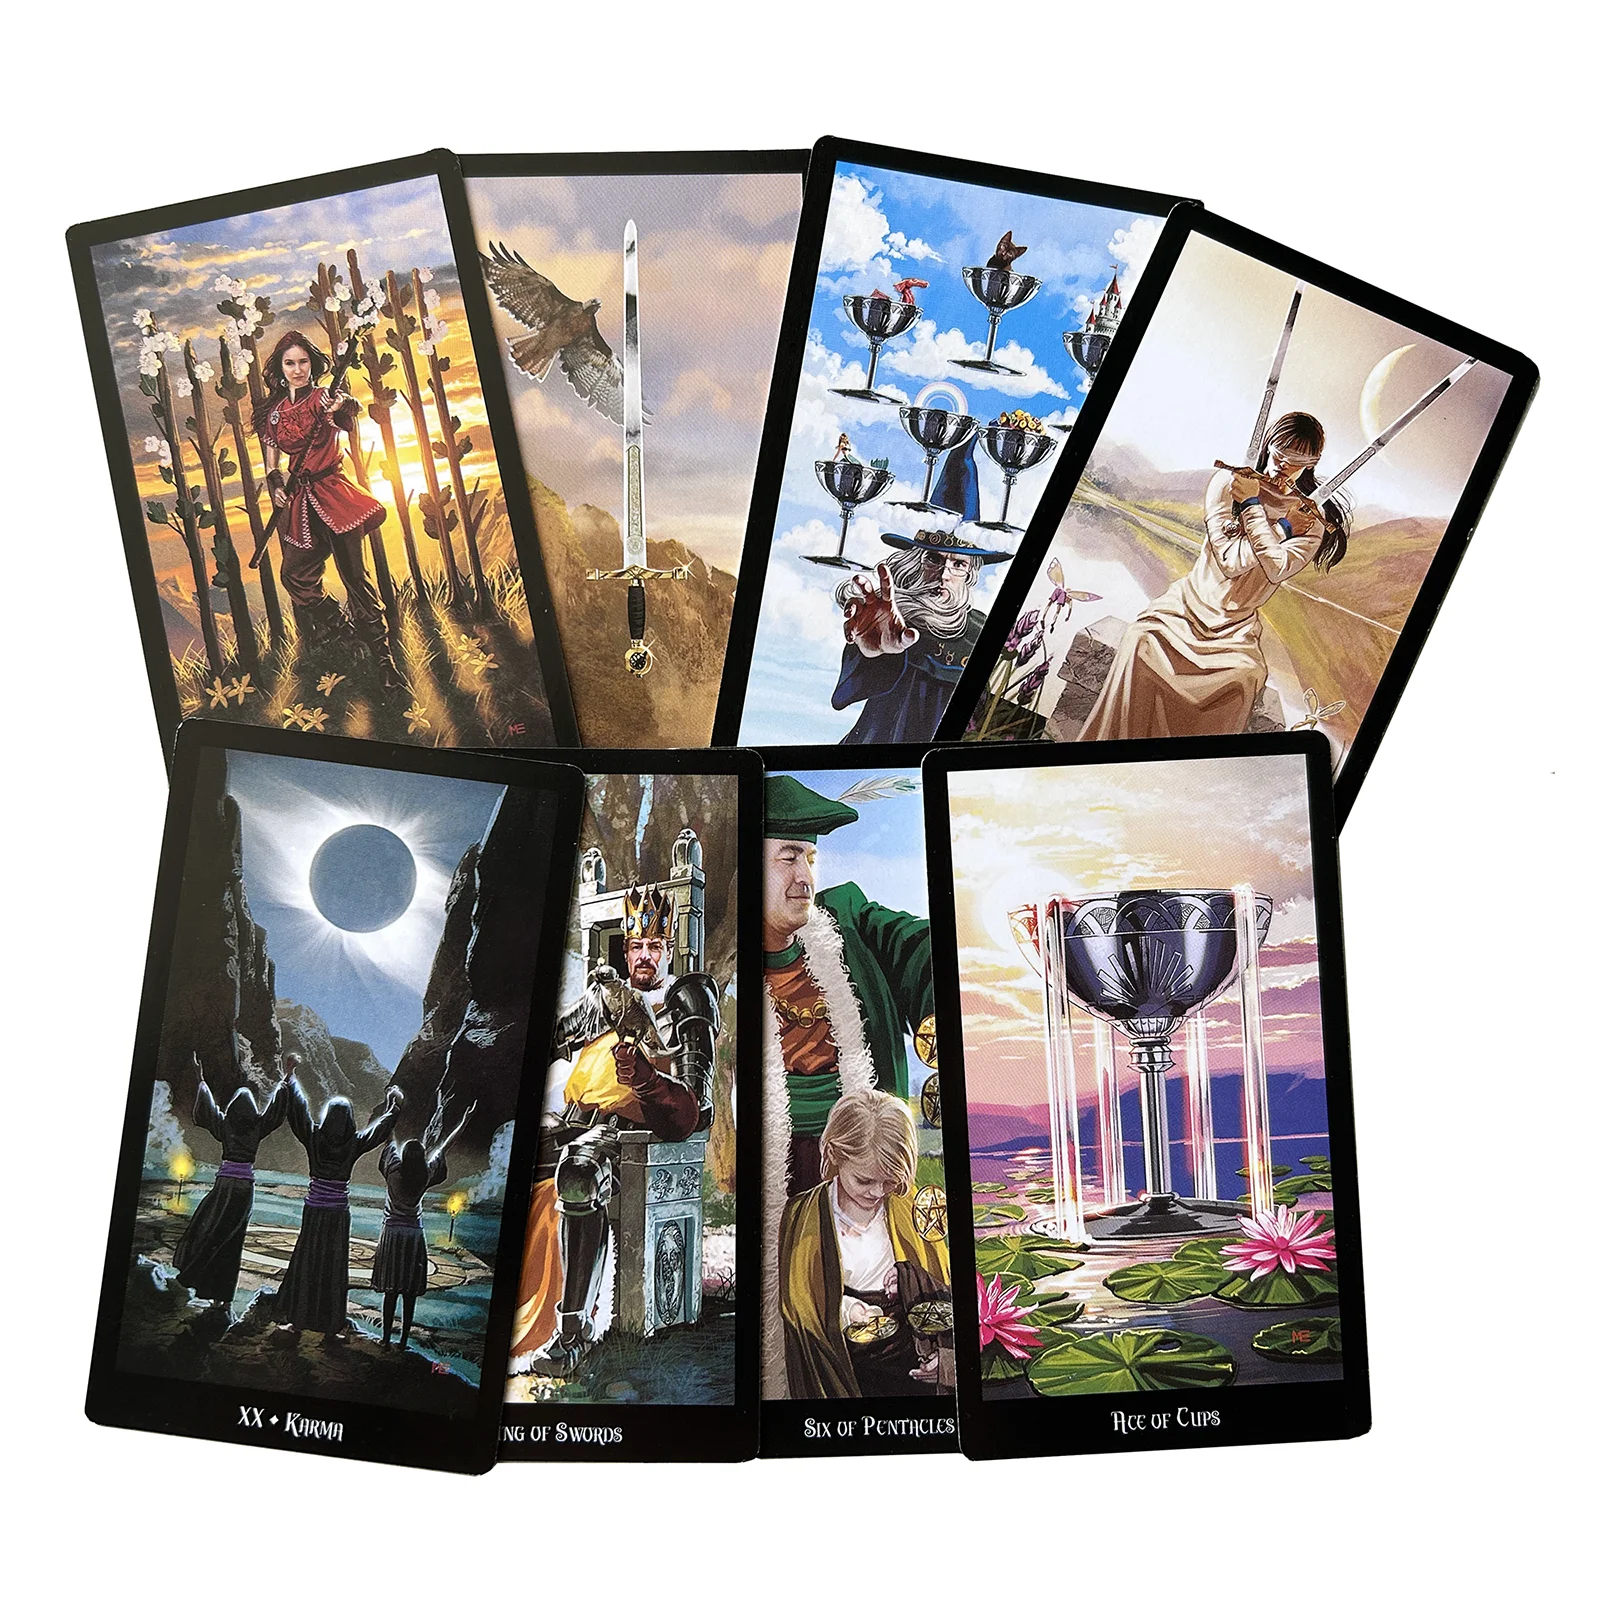 English Deck Tarot 12x7cm High Quality Runes Divination Cards Prophet for Beginners with Guide Book Entertainment Games.